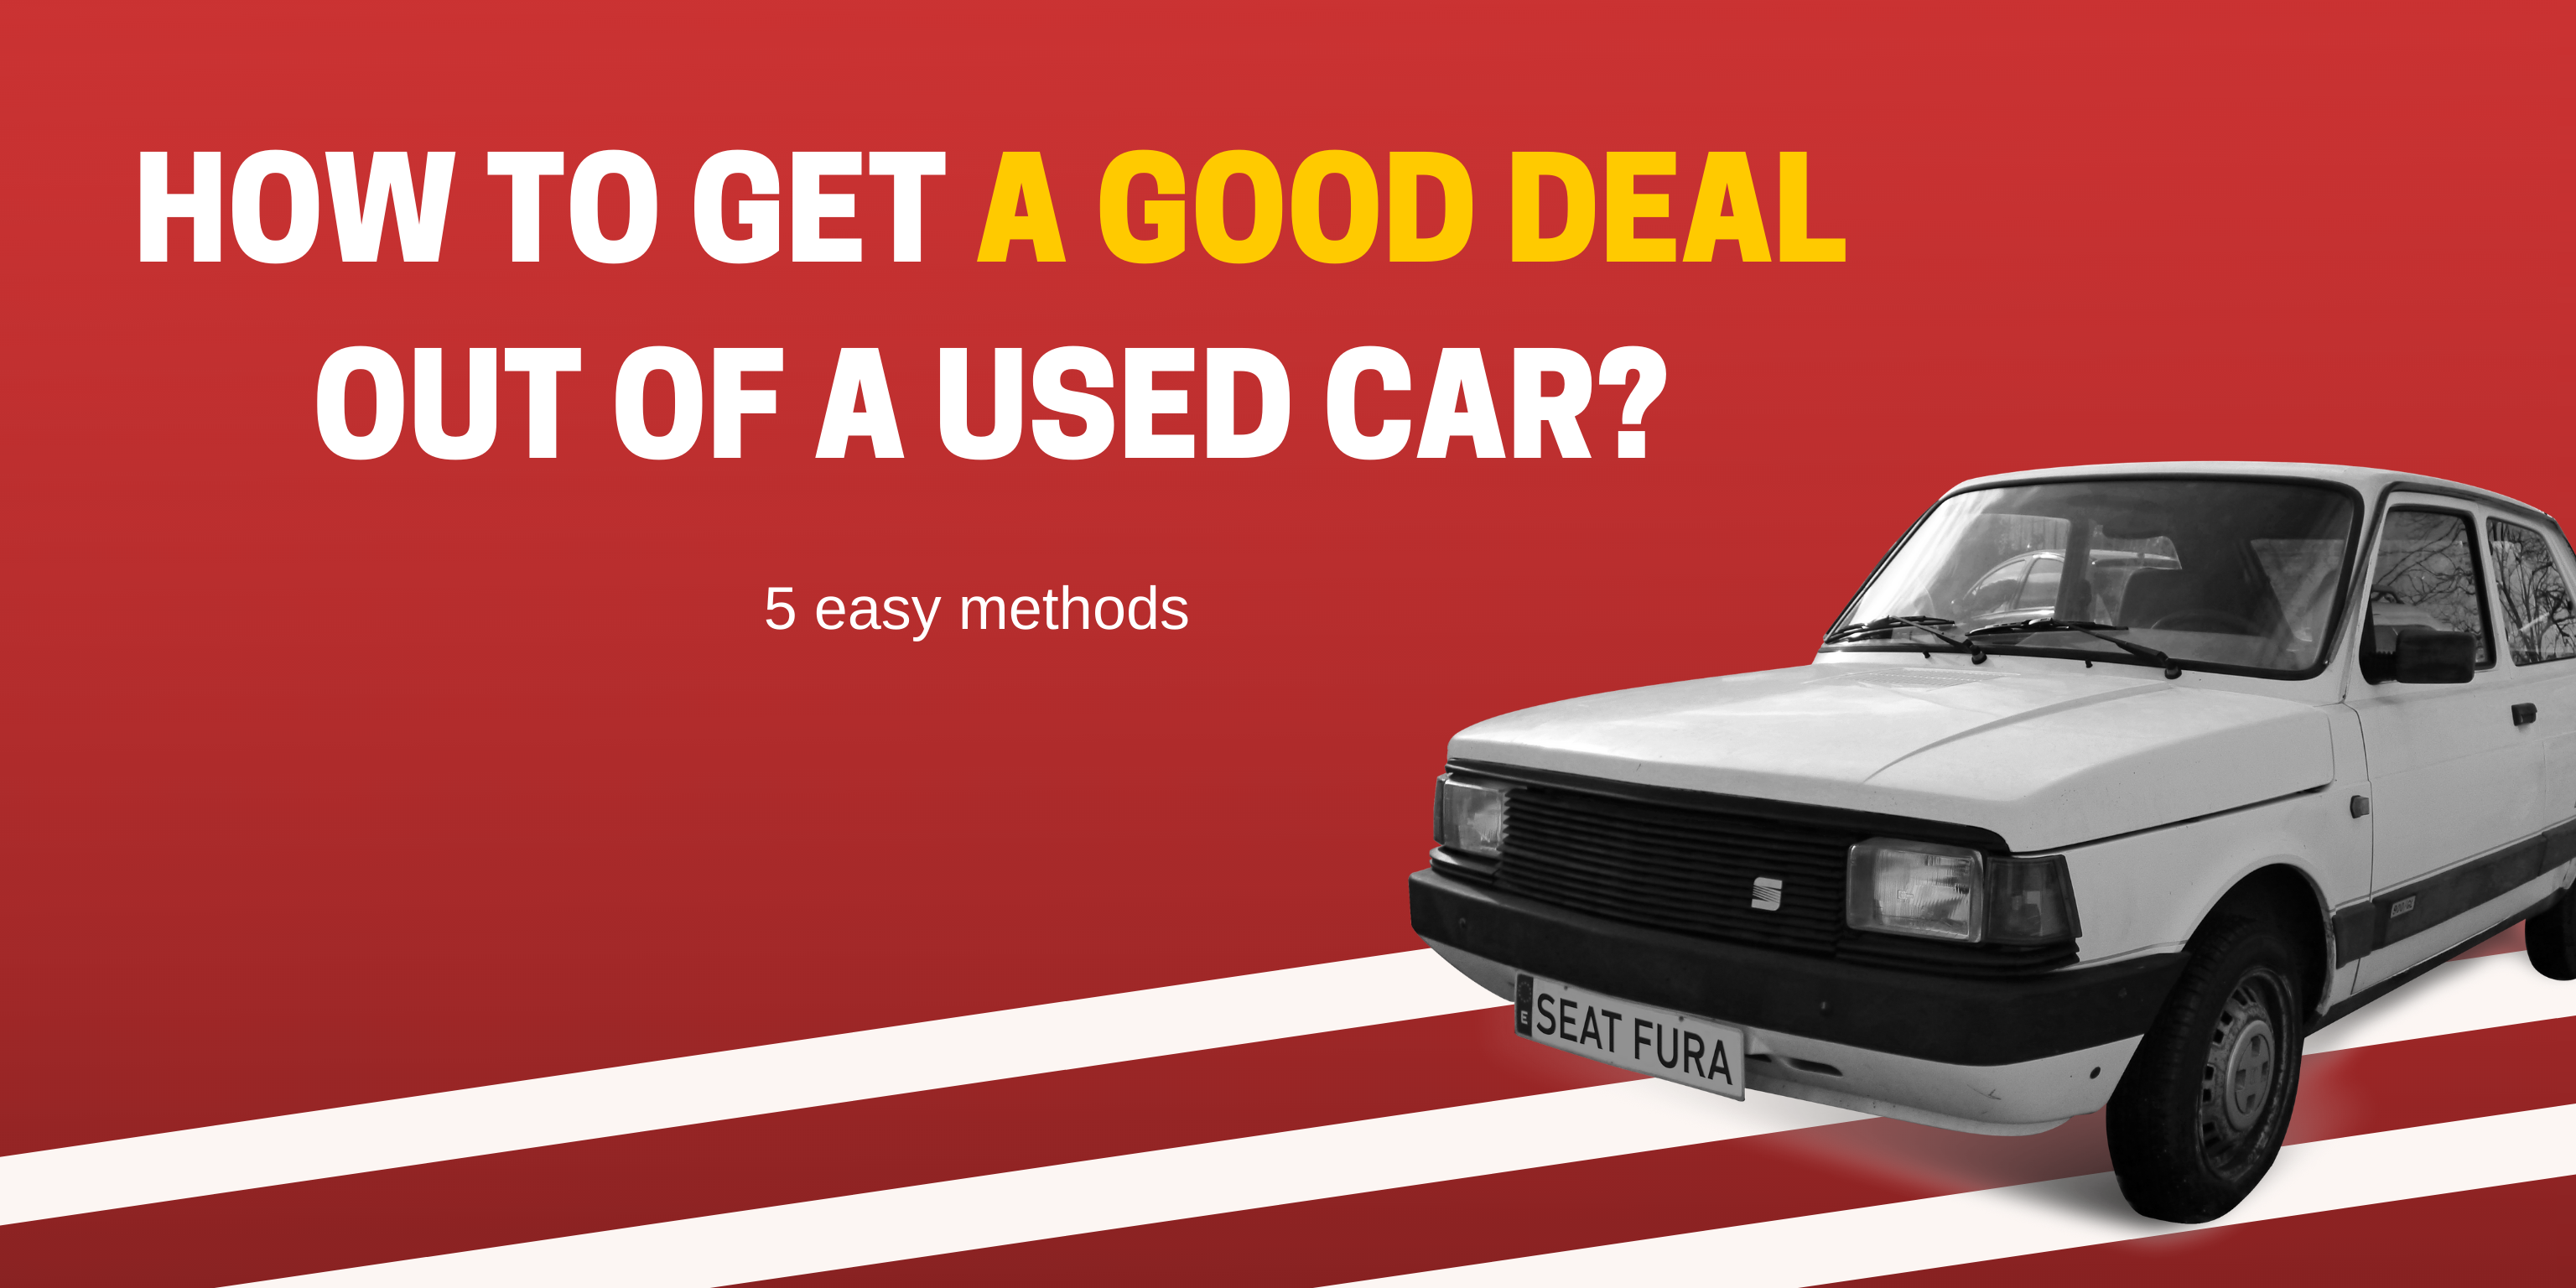 How To Get A Good Deal Out Of A Used Car?